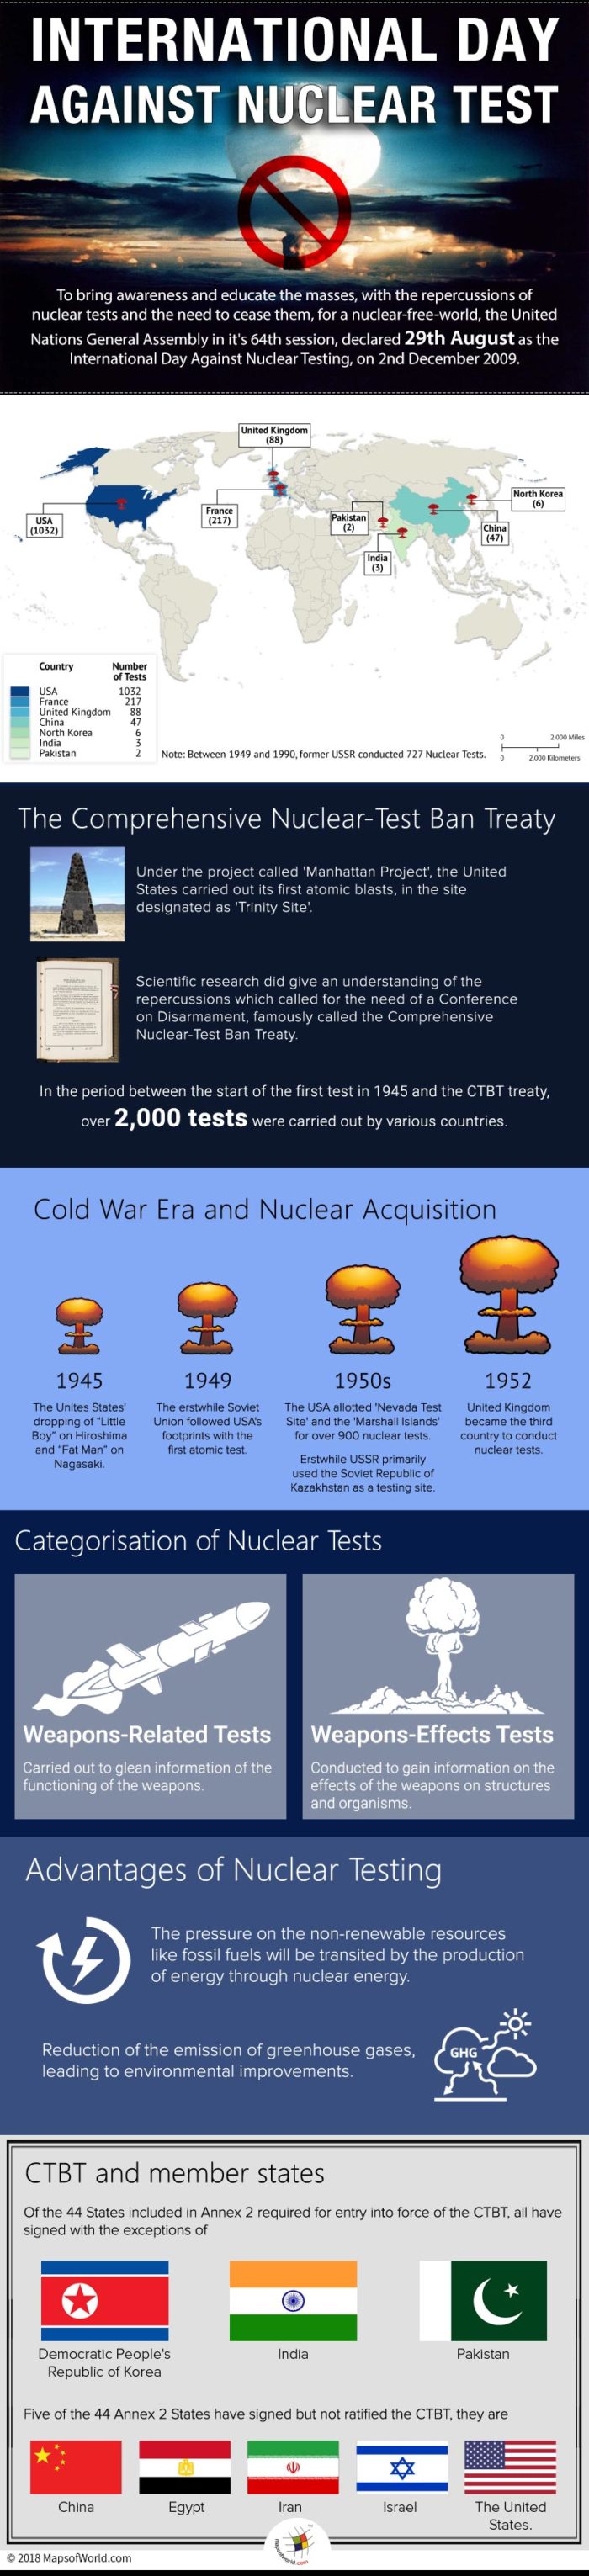 Infographic depicting the history of Nuclear tests.